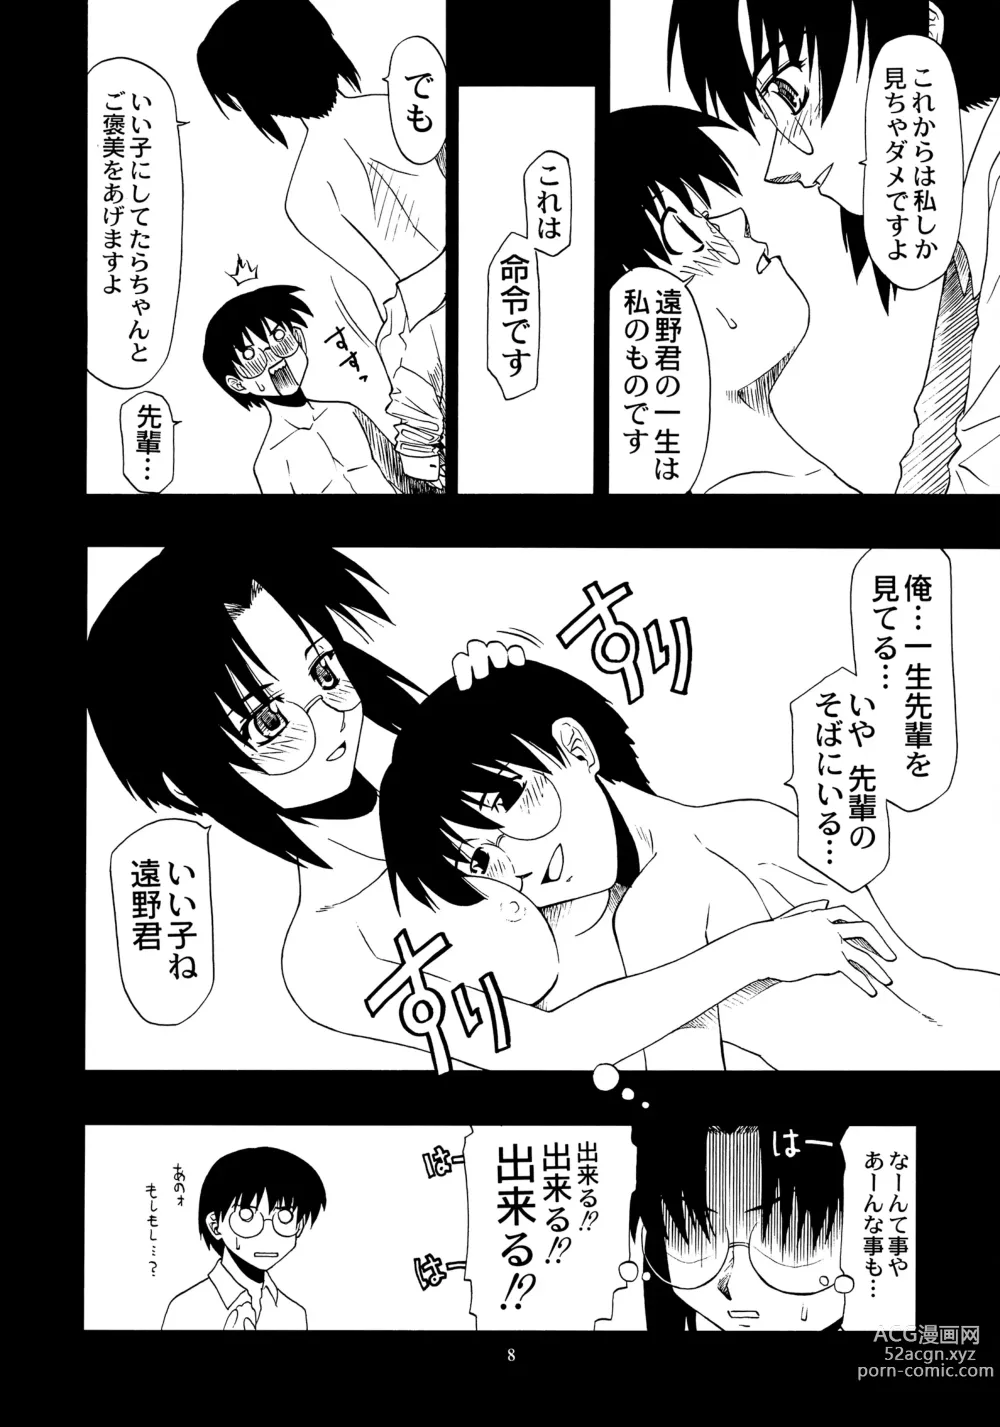 Page 7 of doujinshi Curry Rice no Onna